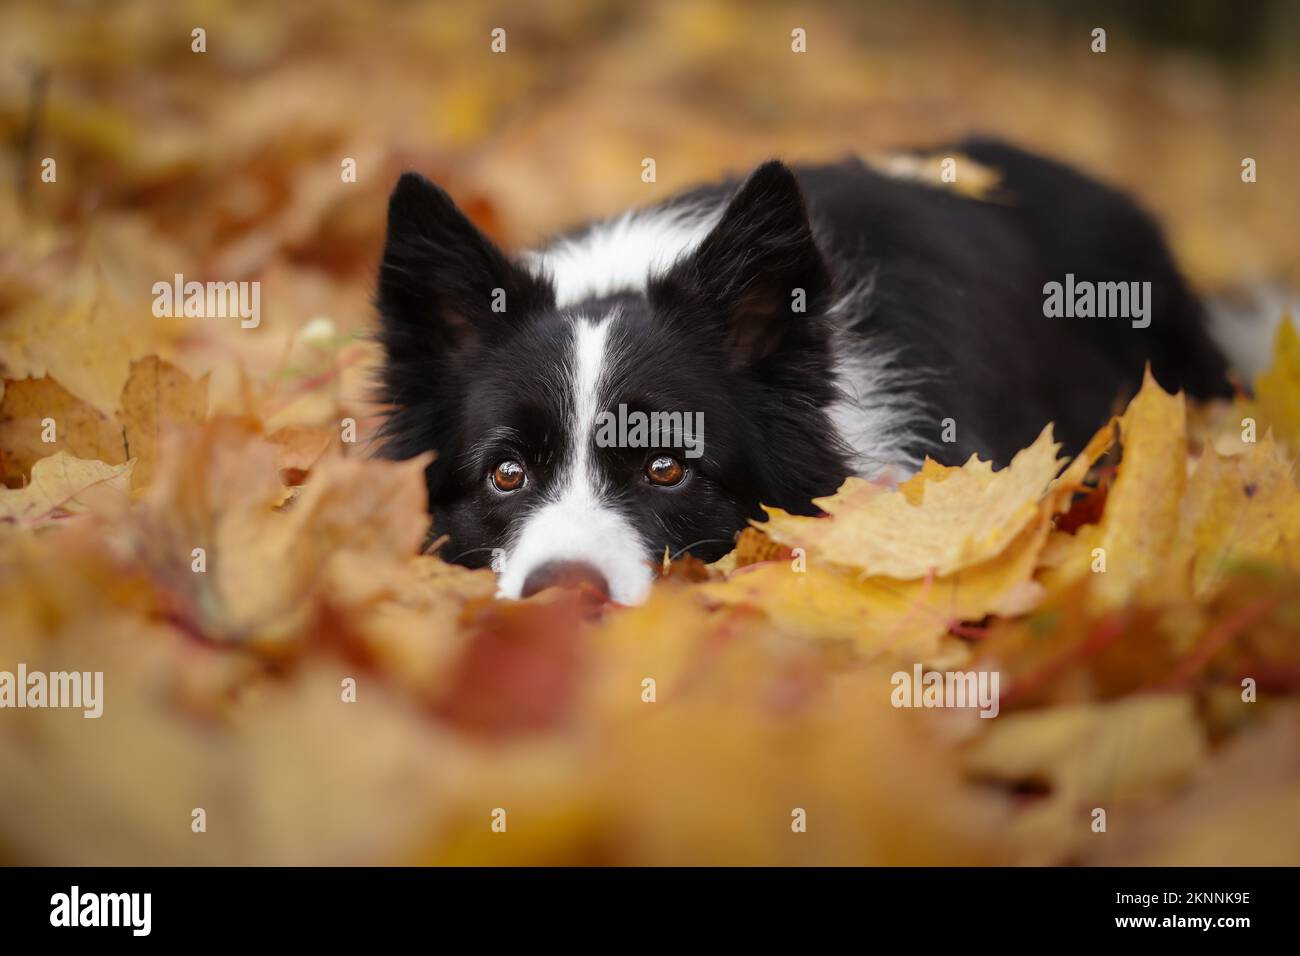 Adorable Border Collie with Cute Eyes Lies Down in Fallen Autumn Leaves. Pretty Black and White Dog Rests in Colorful Foliage during Fall Season. Stock Photo